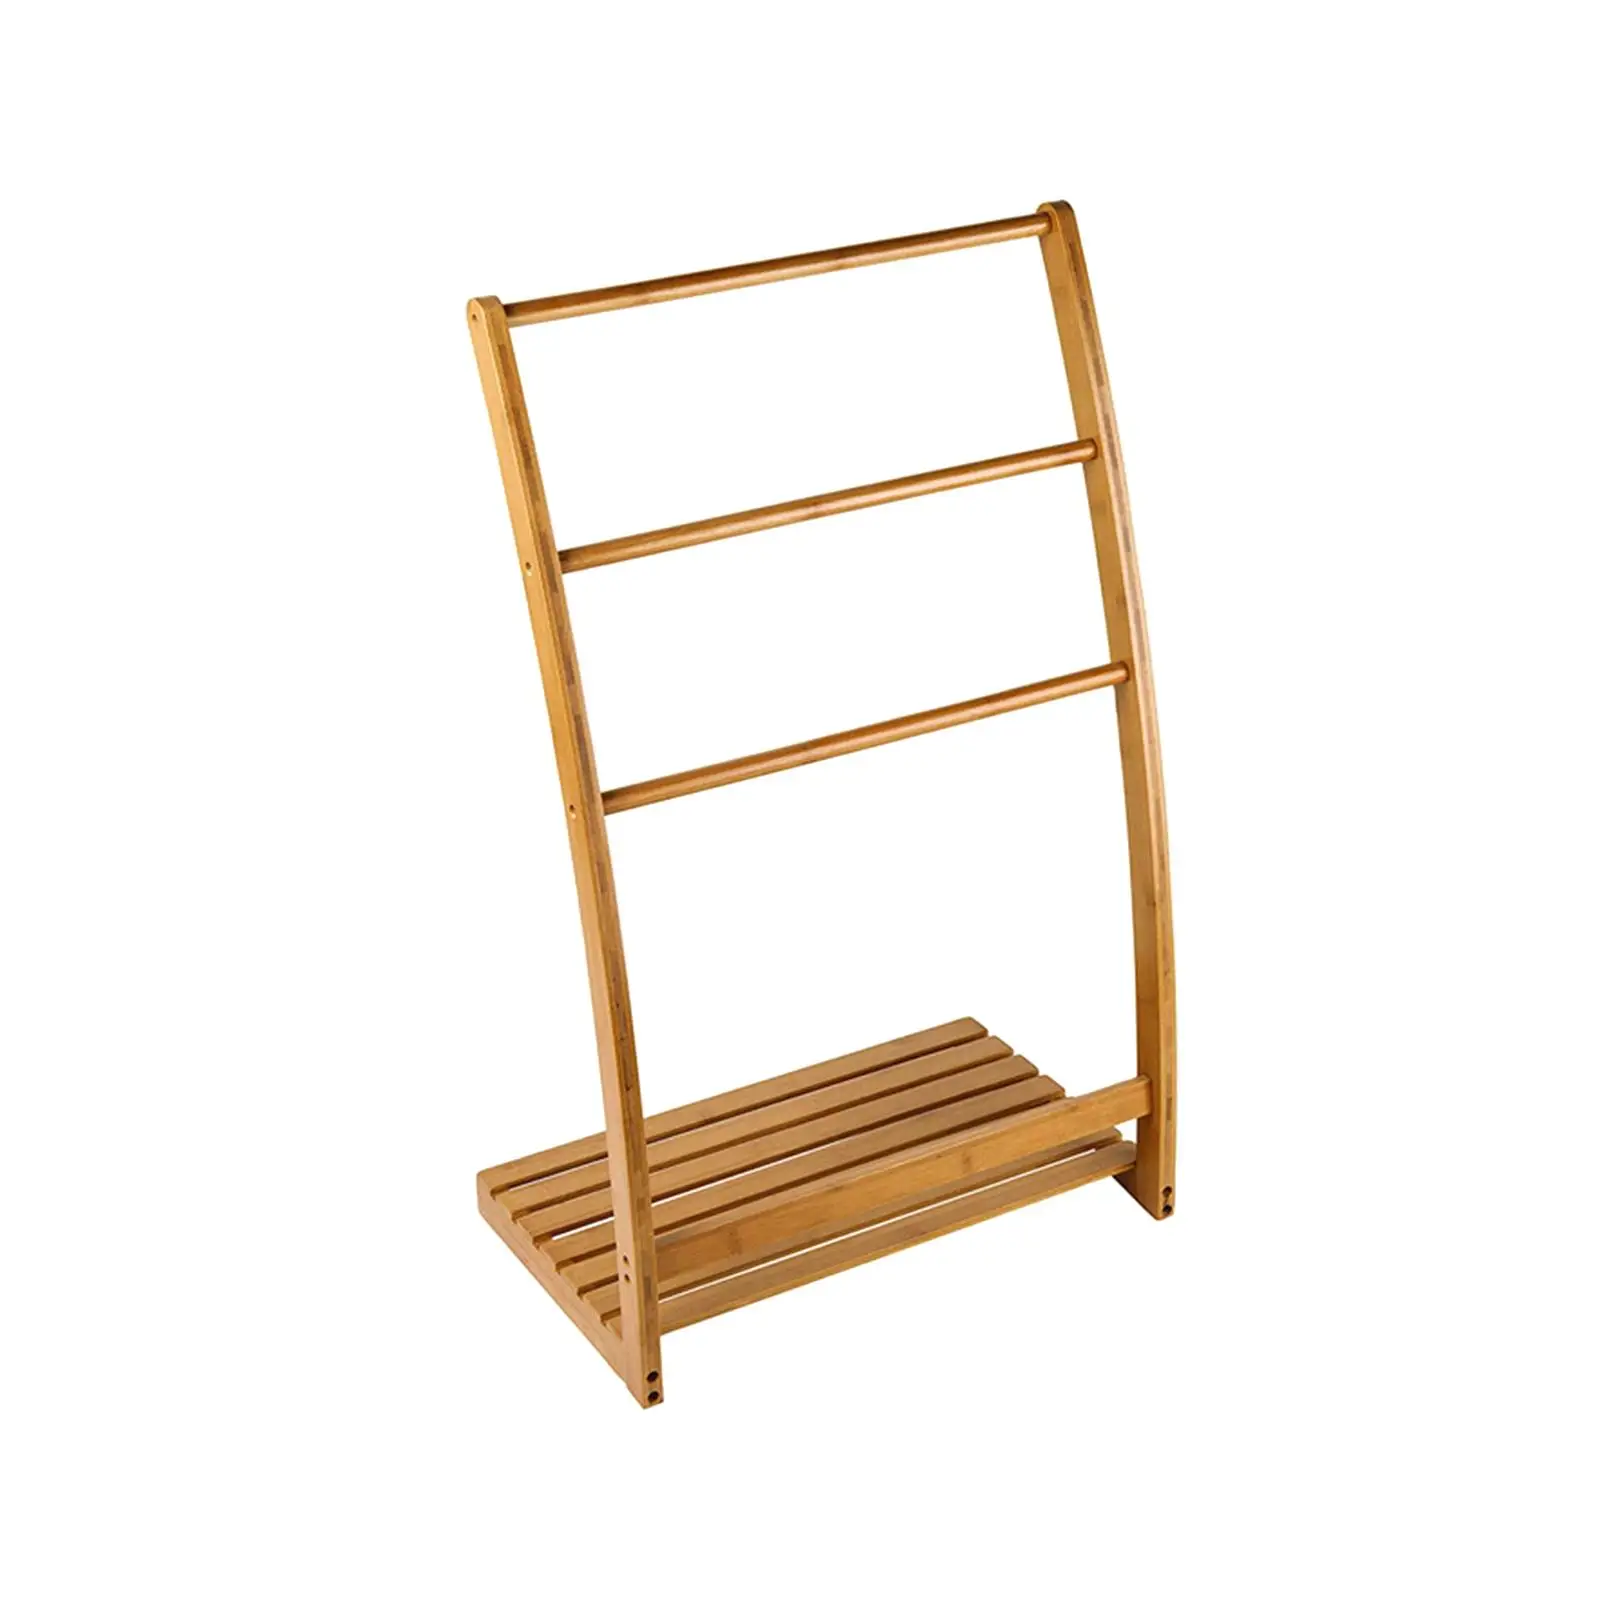 Rustic Bamboo Bathroom Towel Drying Stand Holder Towel Holder Freestanding with 3 Towel Rails for Facecloth Bathrobe Hand Towel